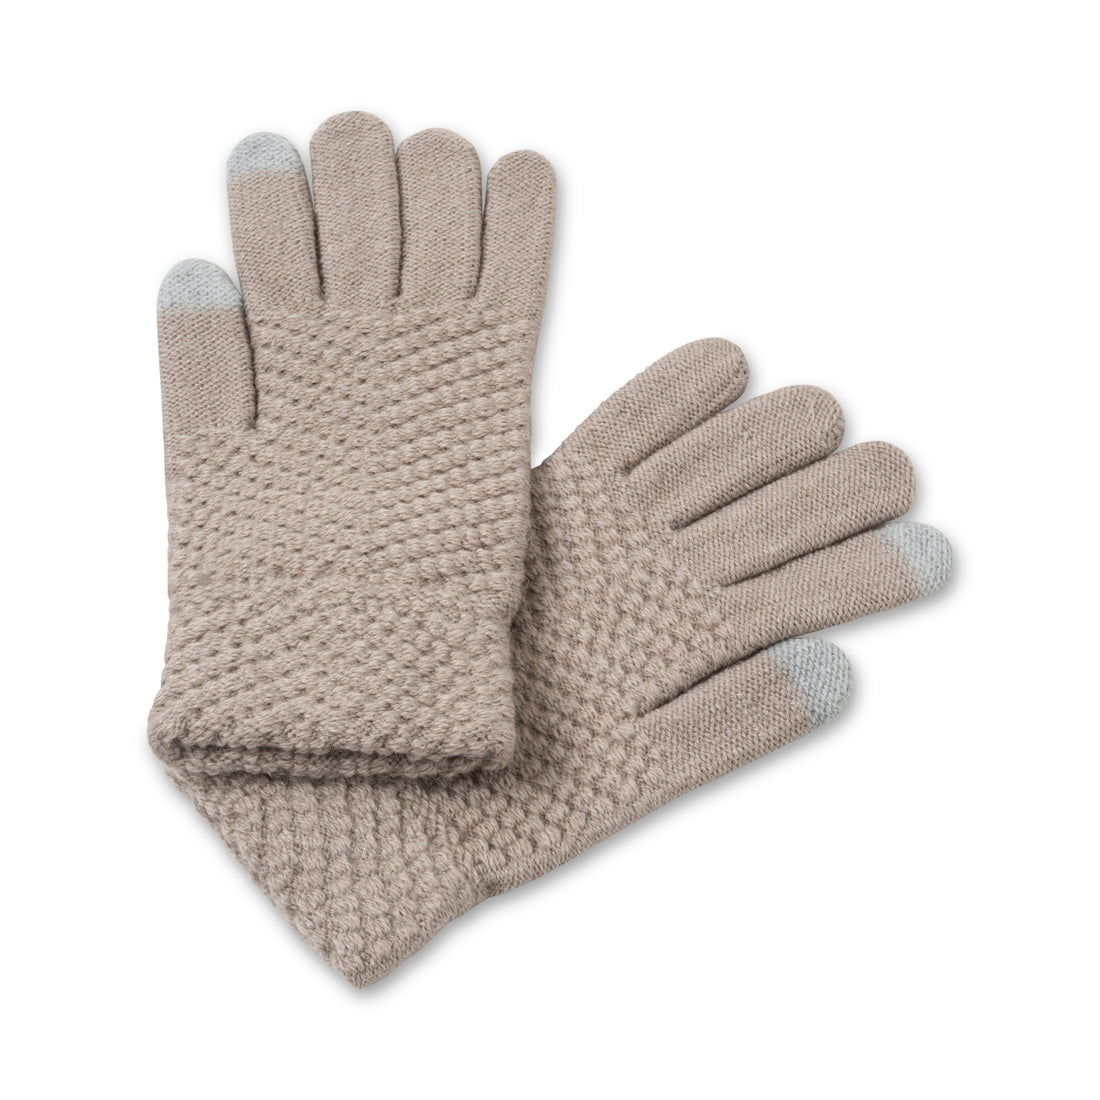 Frosted Pebble Tech Glove